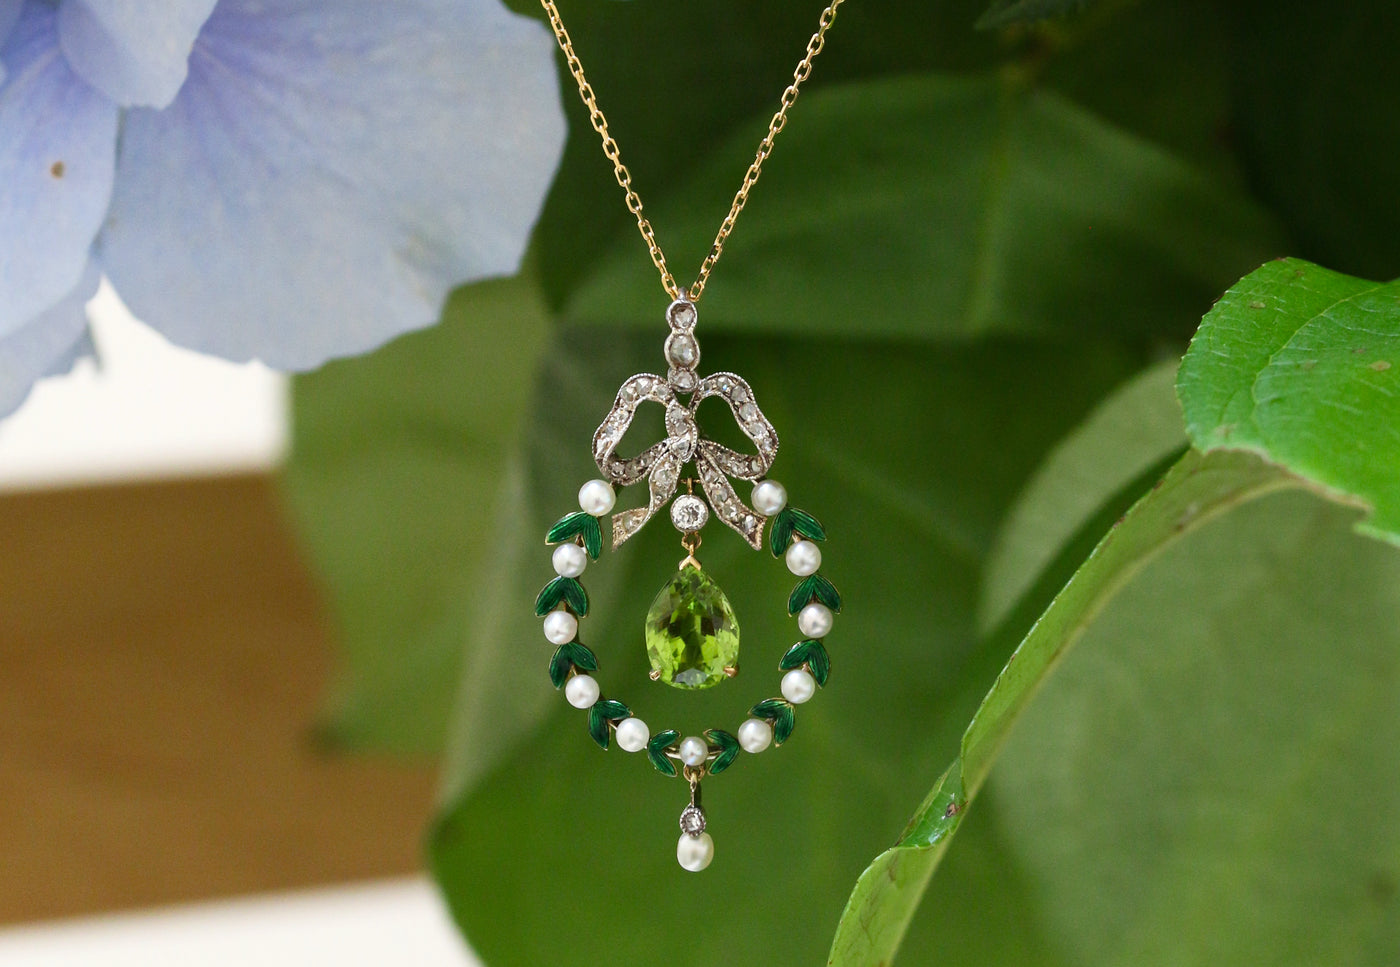 Latest Advert - Belle Époque 18ct Yellow Gold and Silver, Diamond, Enamel, Peridot and Seed Pearl Decorative Pendant